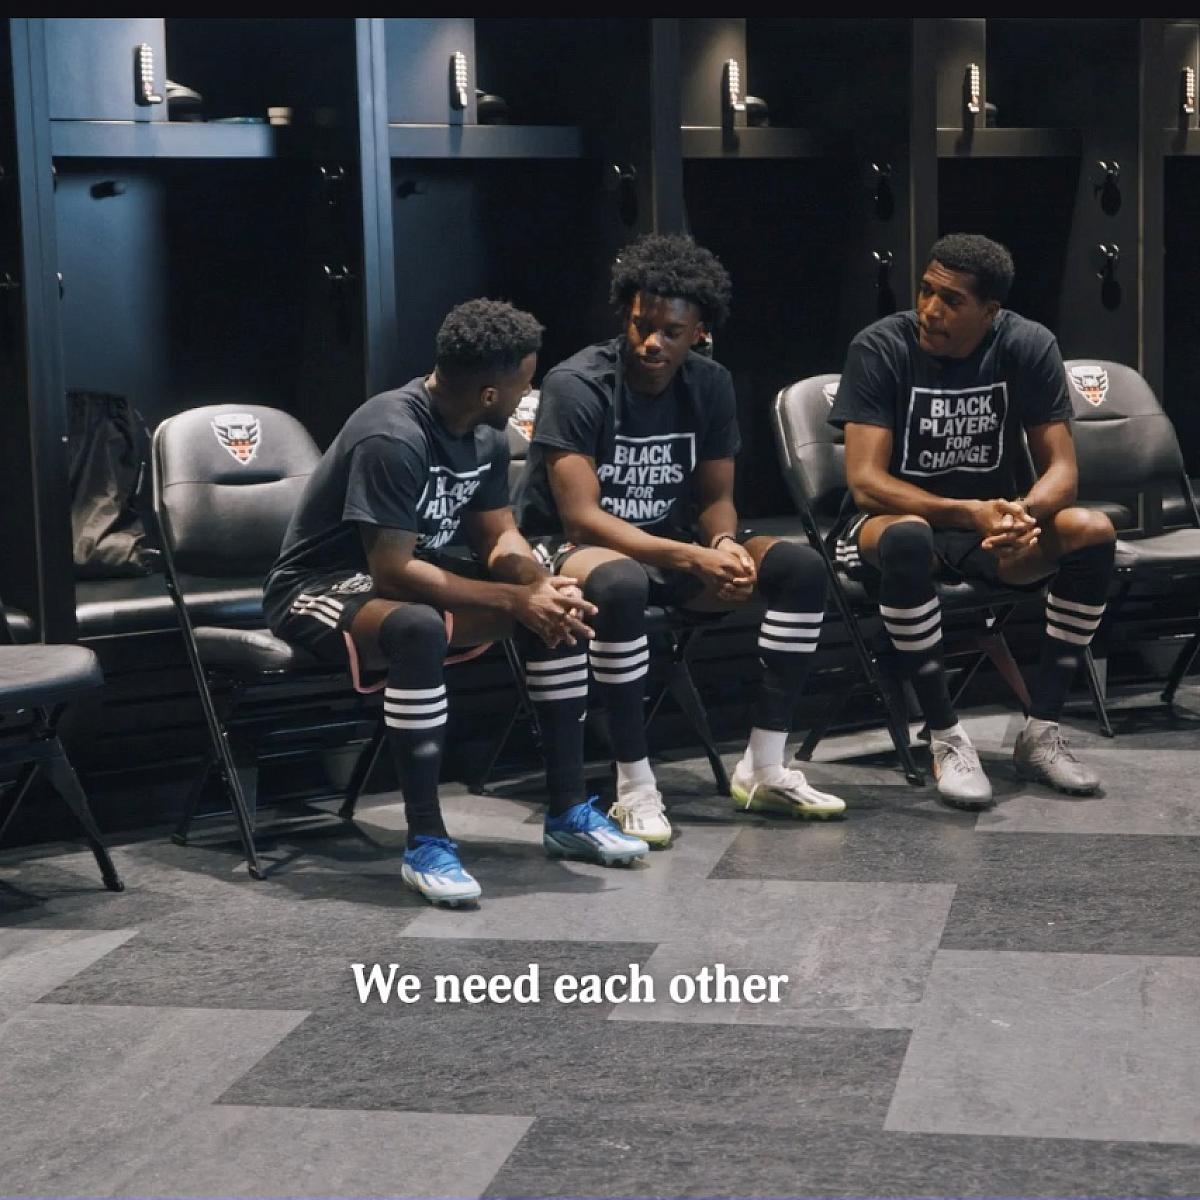 Image of three members of Black Players for Change